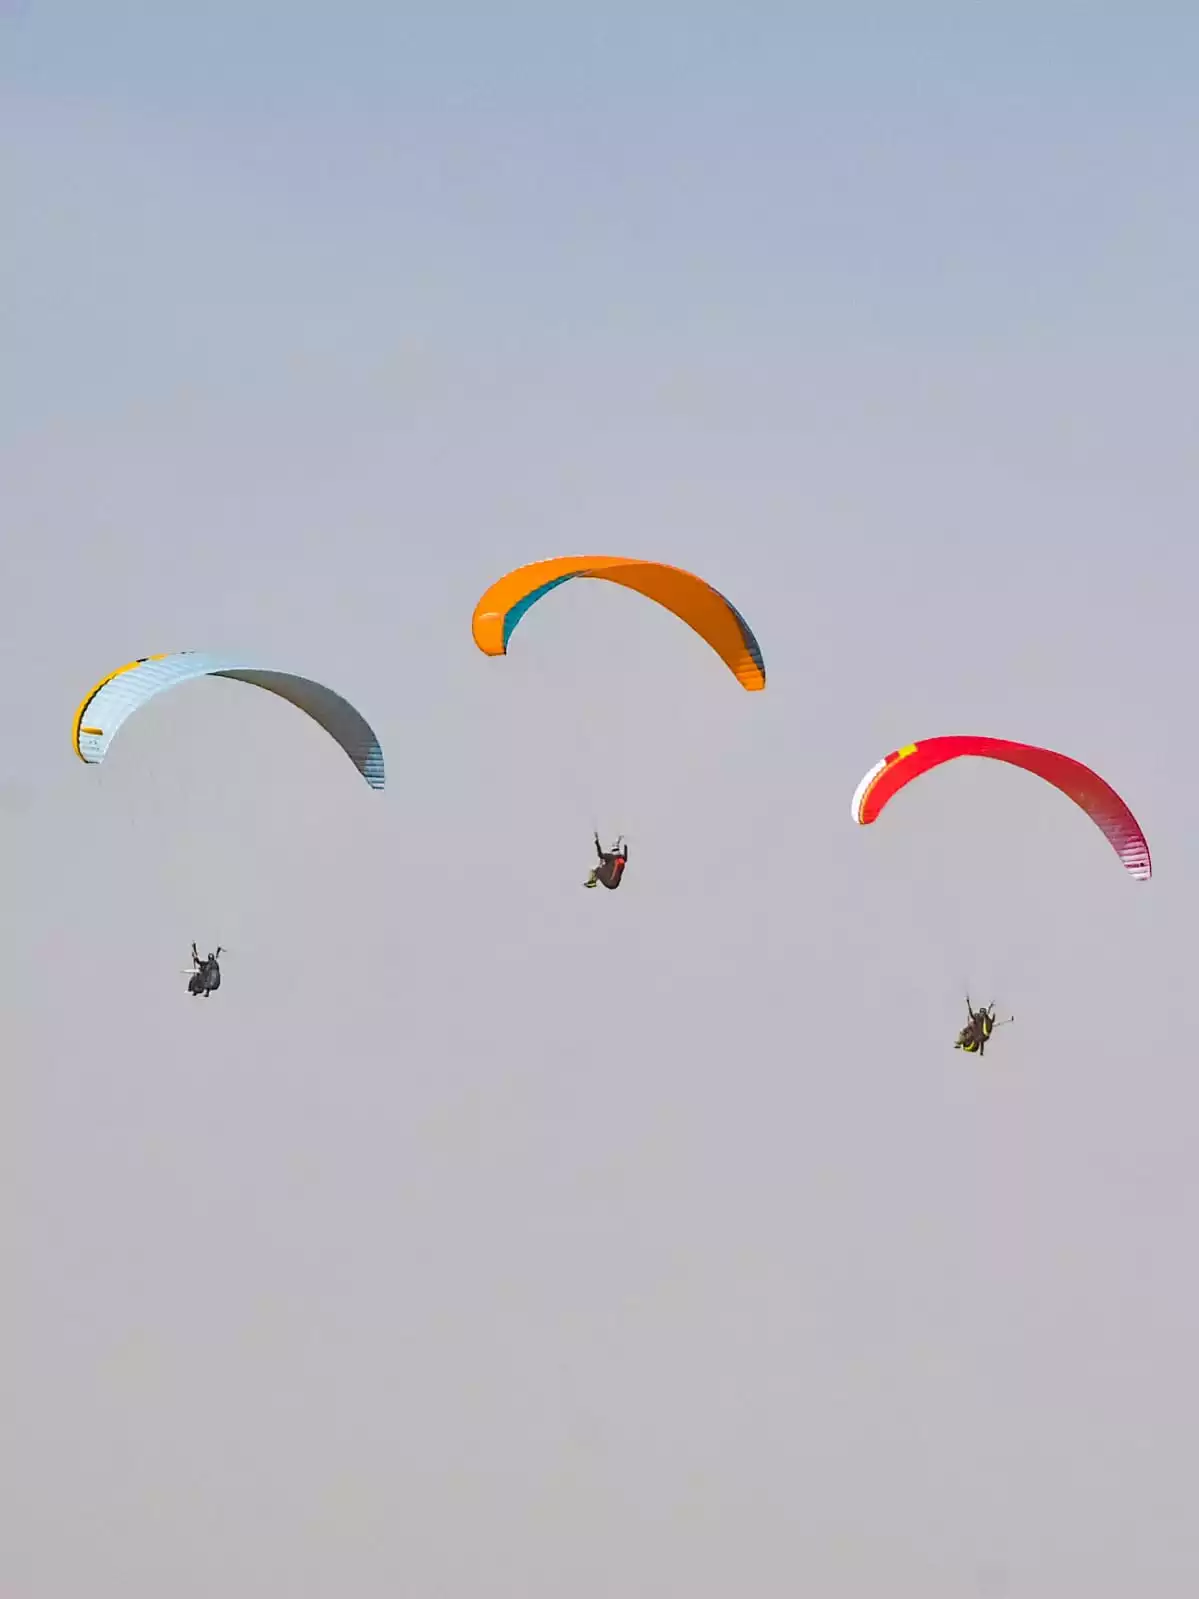 Paragliding-over-the-Kik-plateau-from-Marrakech-nomad-excursion-group-fly